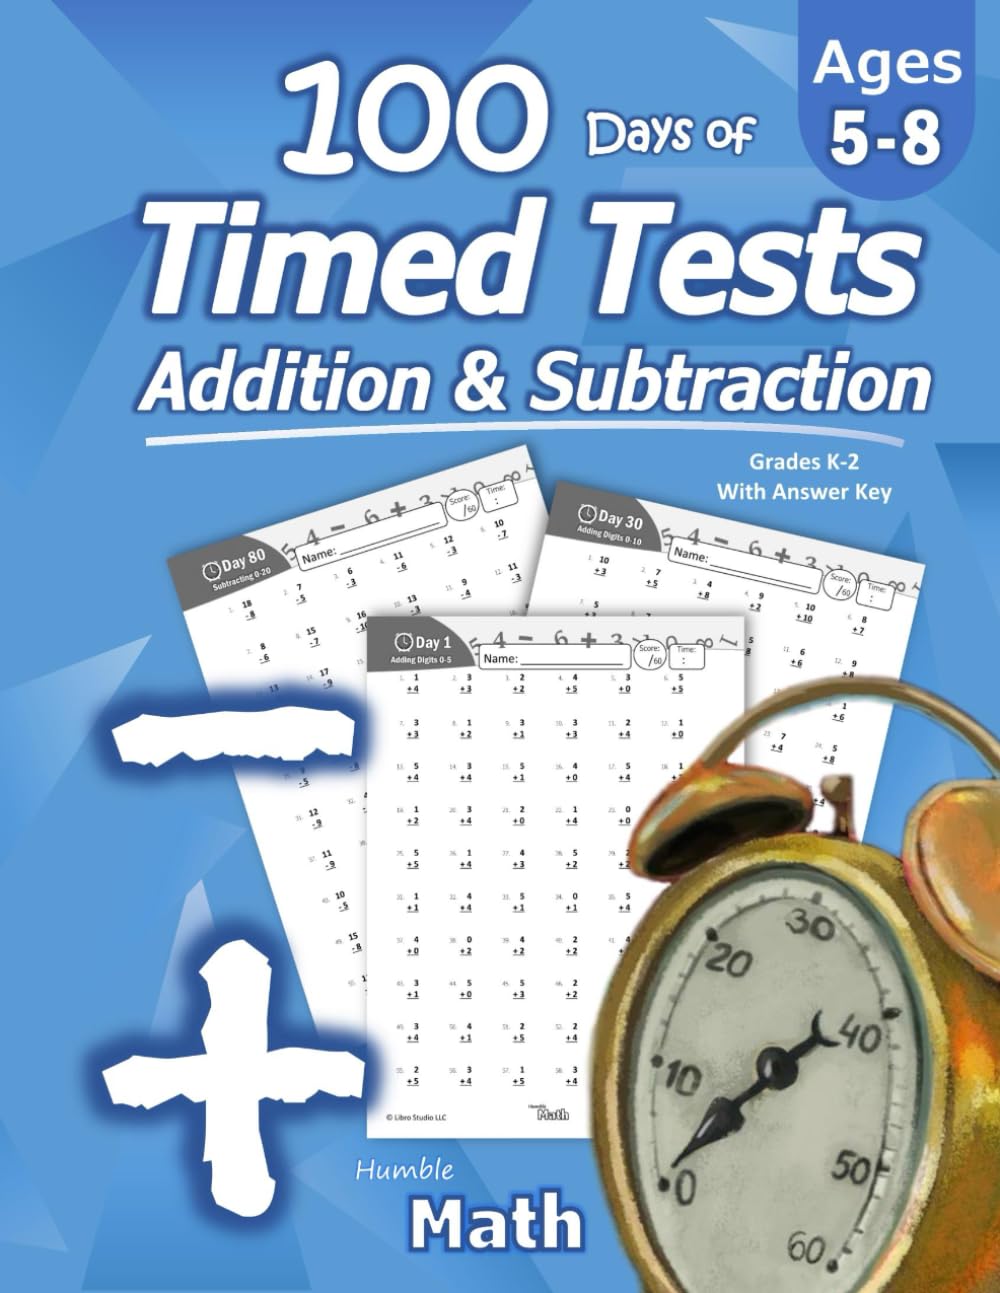 Humble Math - 100 Days of Timed Tests: Addition and Subtraction: Ages 5-8, Math Drills, Digits 0-20, Reproducible Practice Problems by Math, Humble